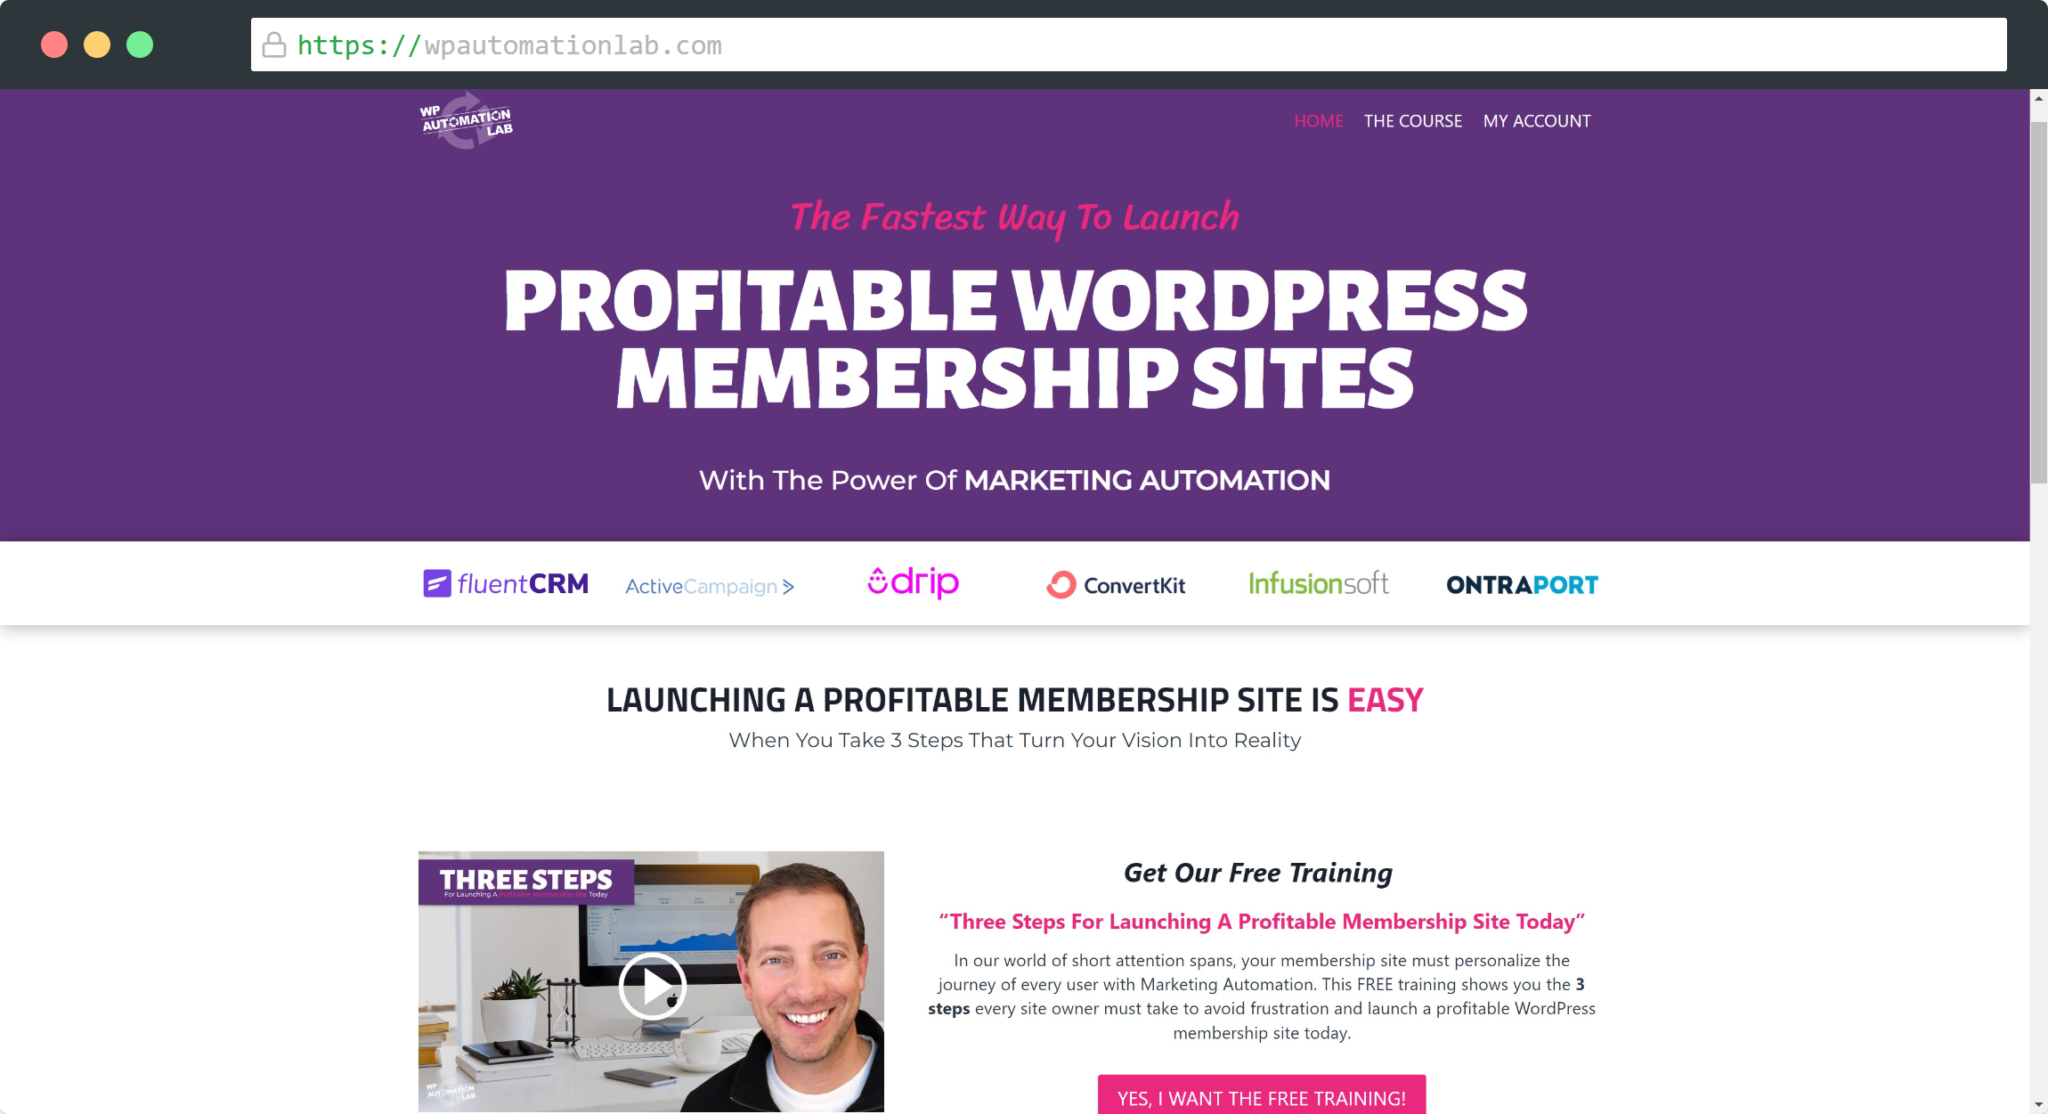 3 Steps For Launching A Profitable Membership Site Today